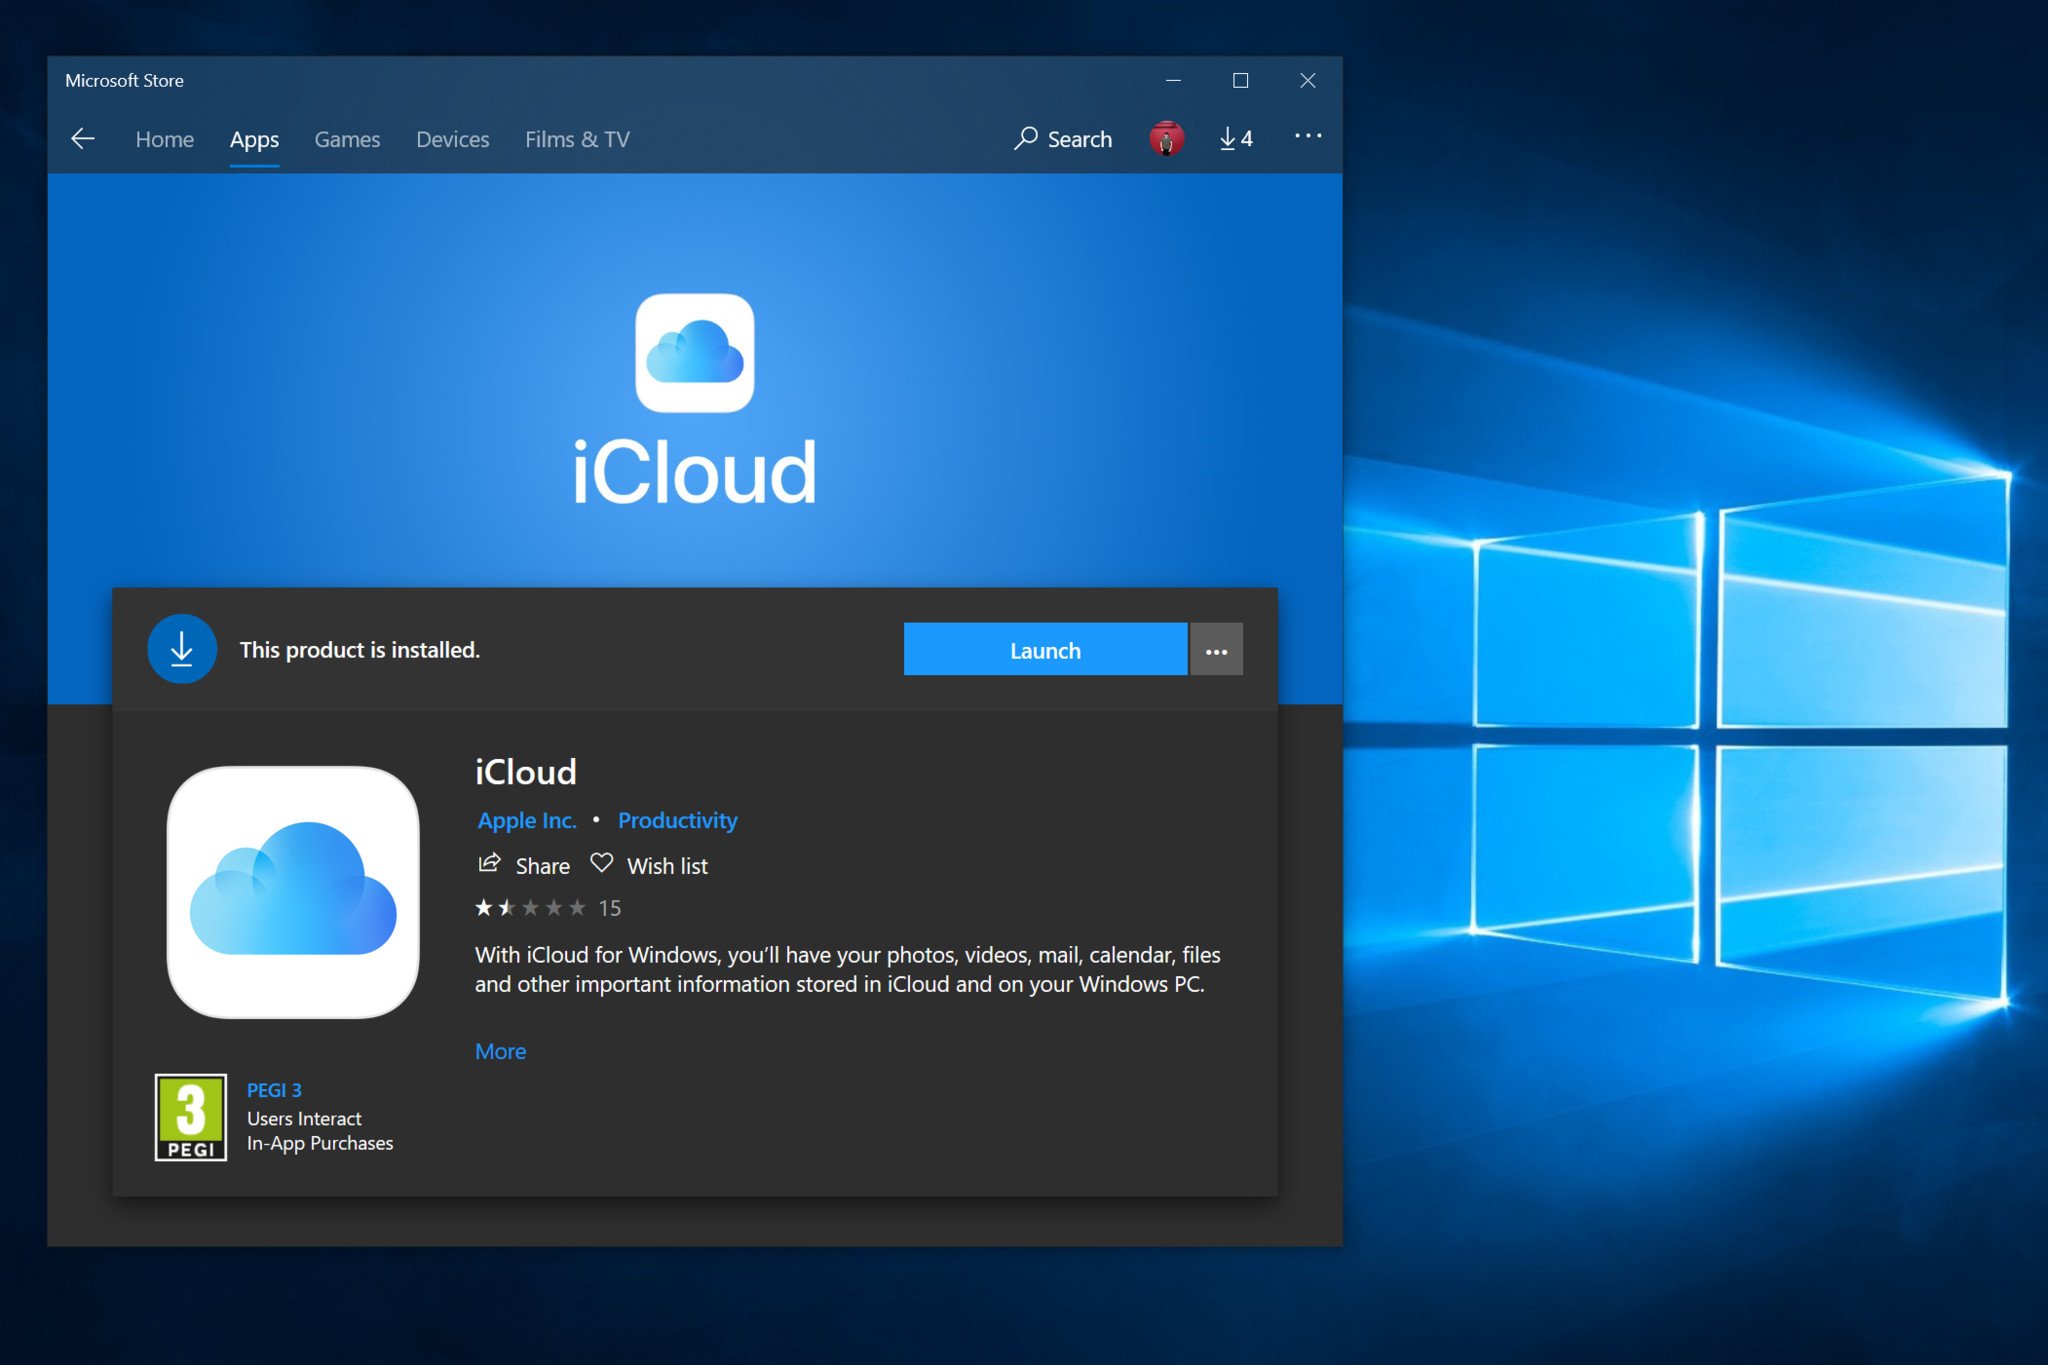 Download iCloud from the Windows 10 Microsoft Store.